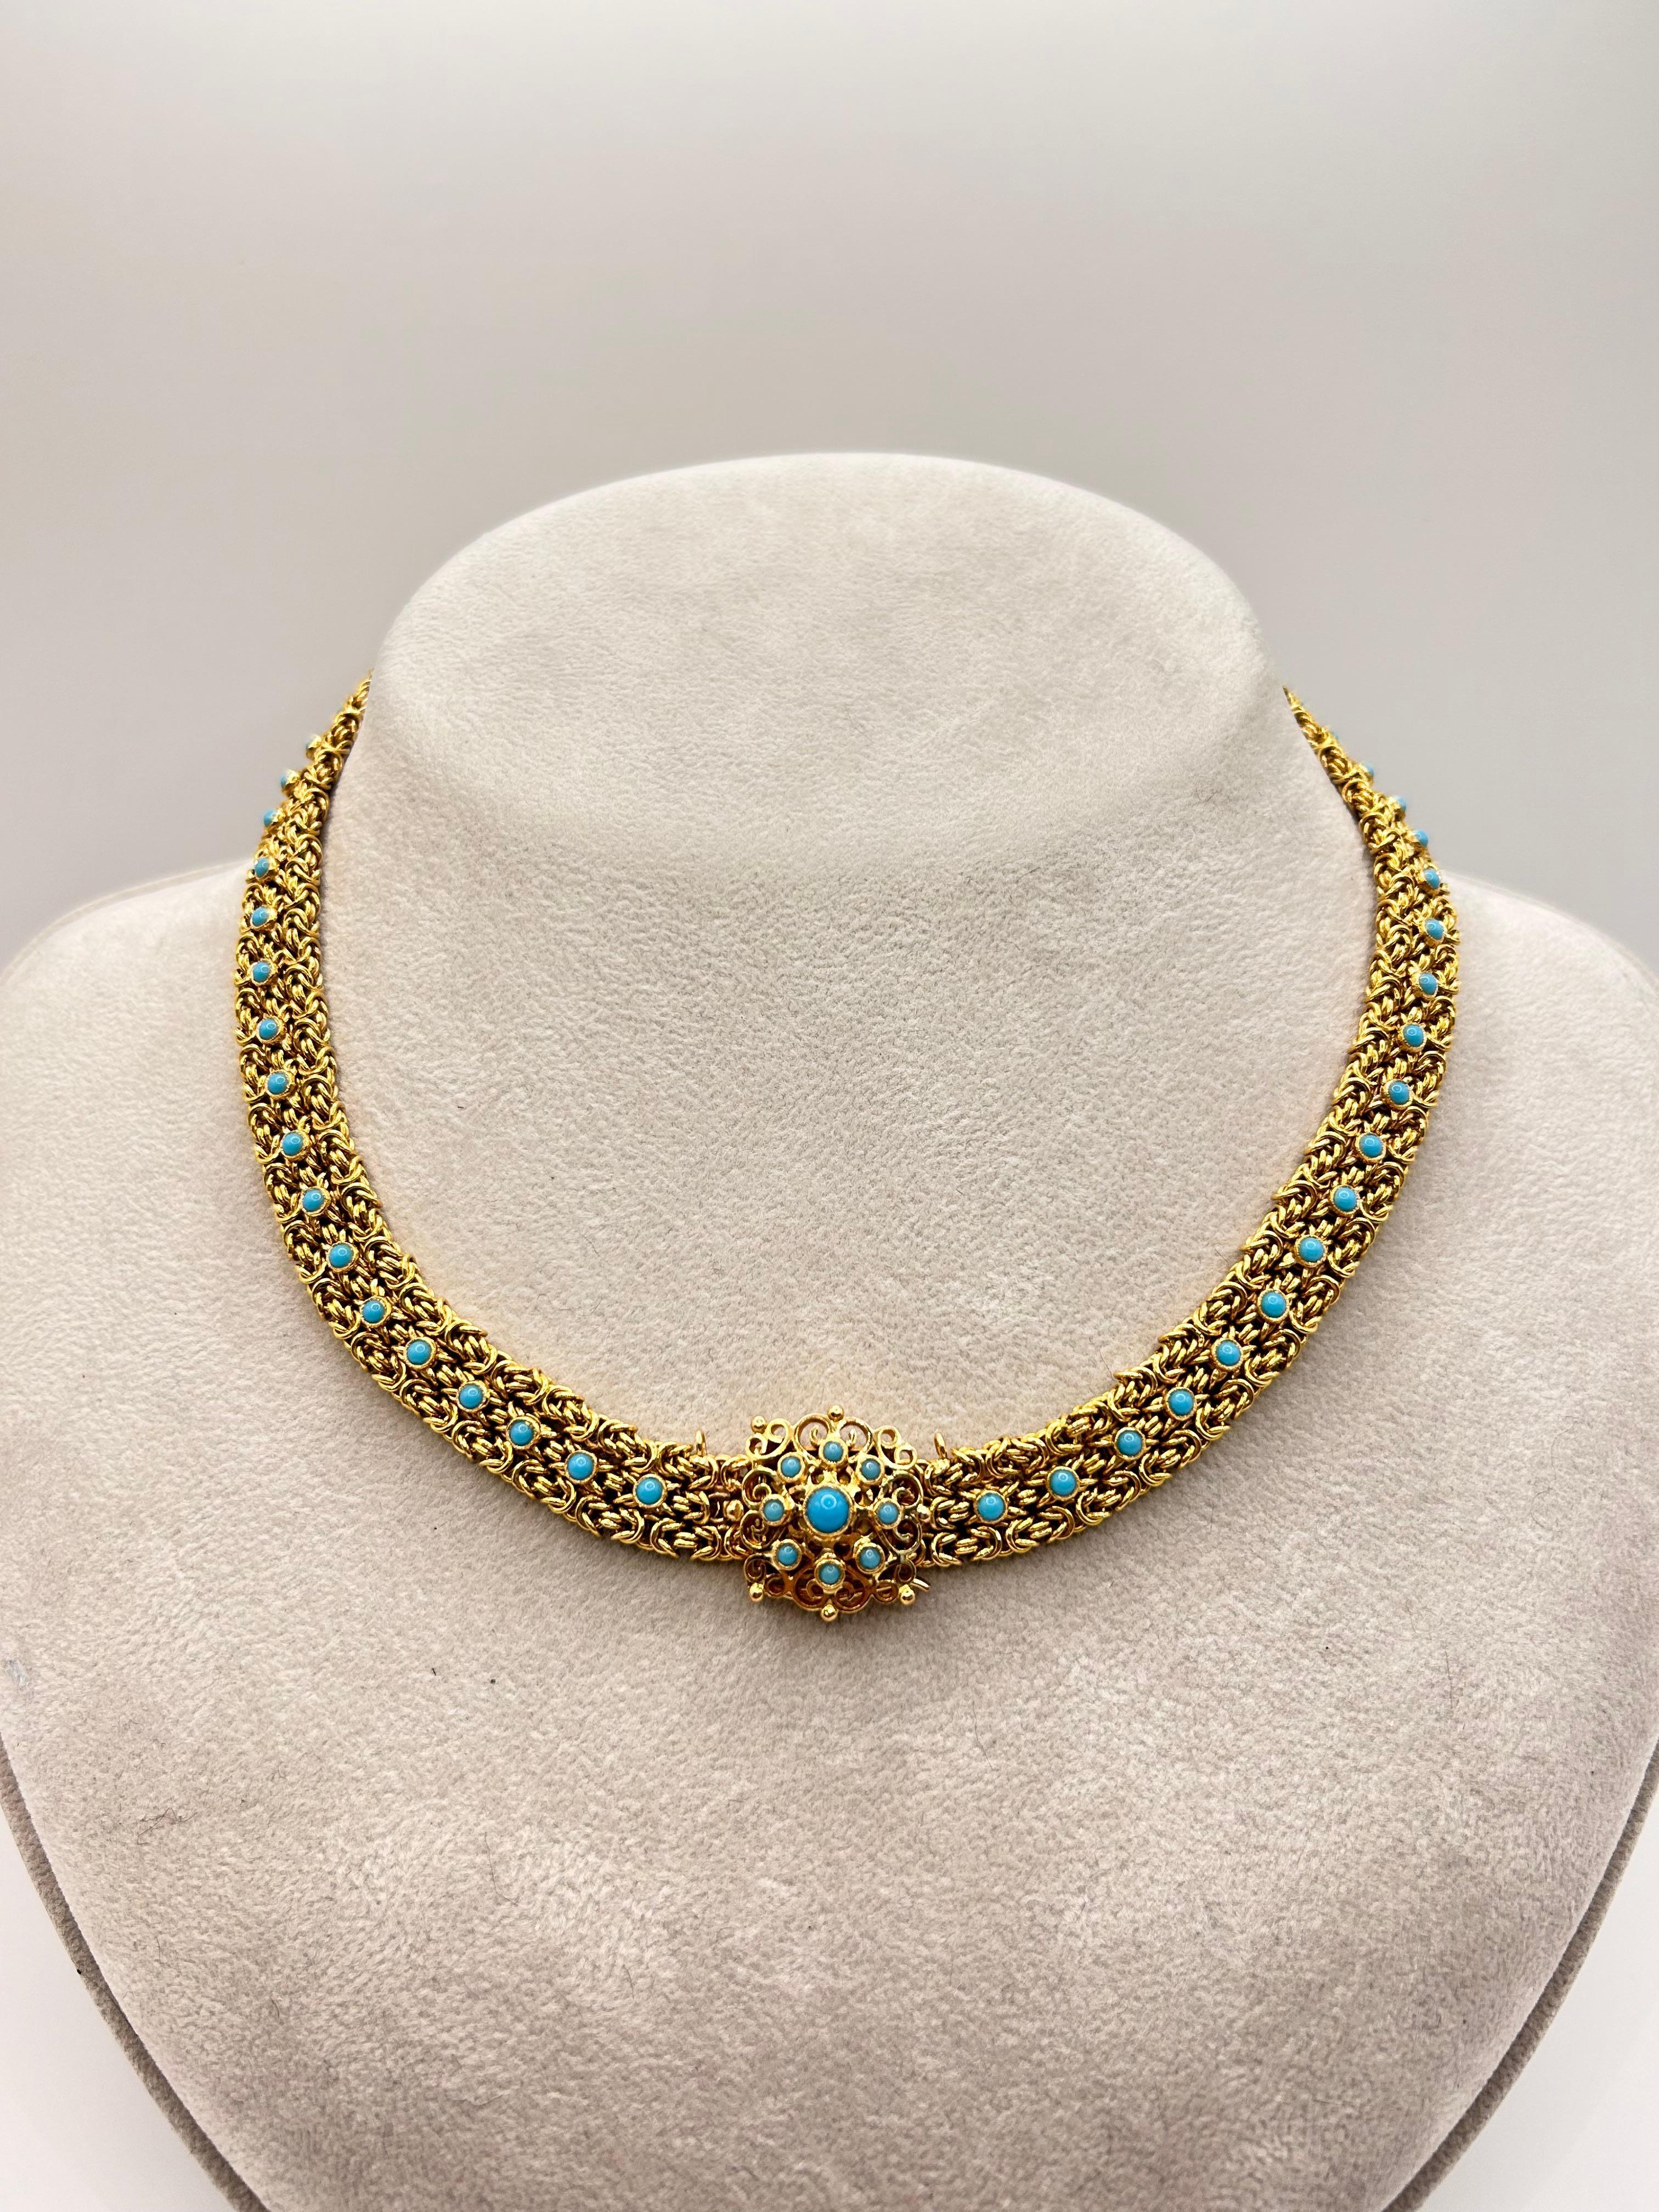 Vintage 19 karat yellow gold woven necklace set with round blue Turquoise.  
Portugal circa 1950.